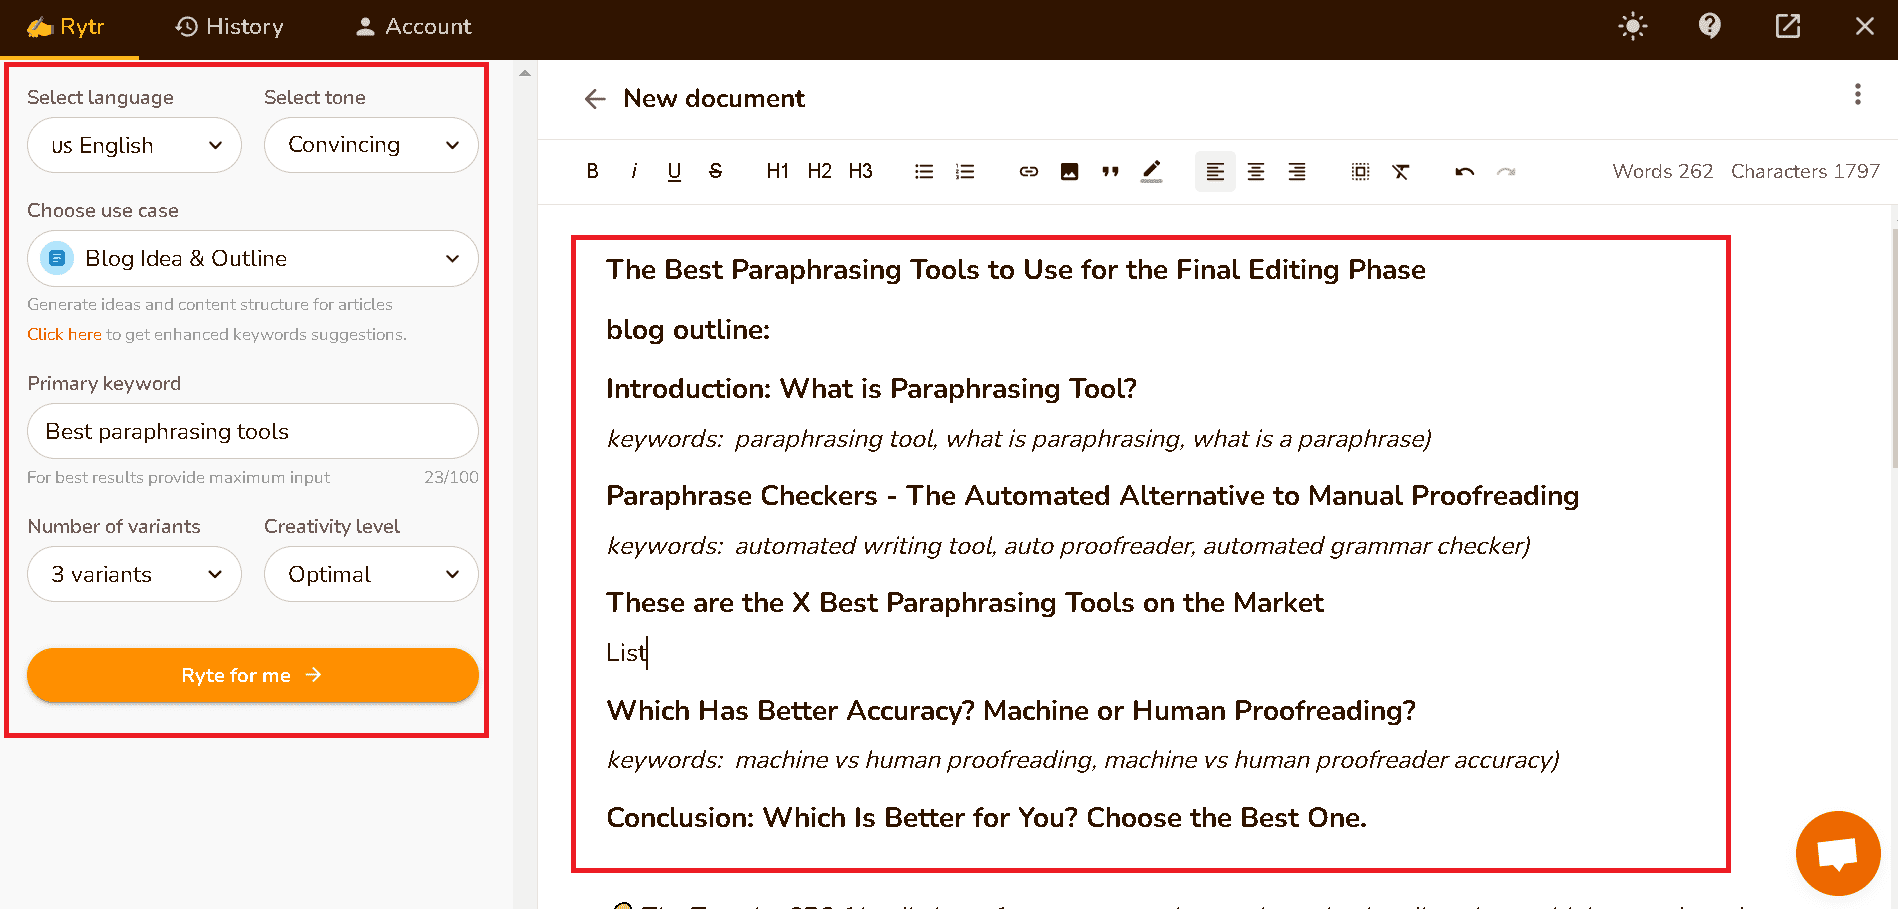 Rytr generated outline for the keyword "best paraphrasing tools"